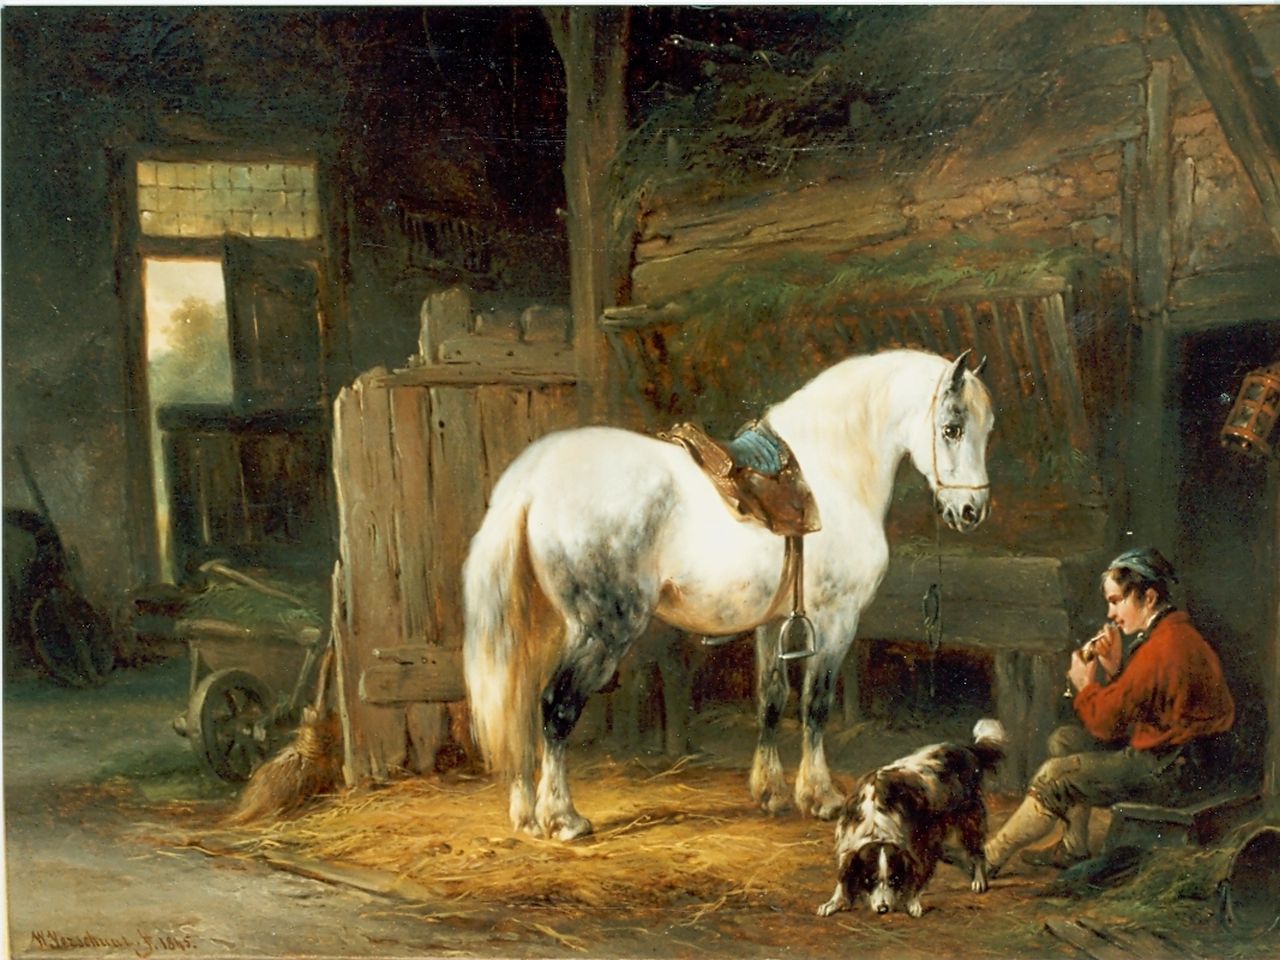 Verschuur W.  | Wouterus Verschuur, Stable interior, oil on canvas 27.0 x 35.0 cm, signed l.l. and dated 1845